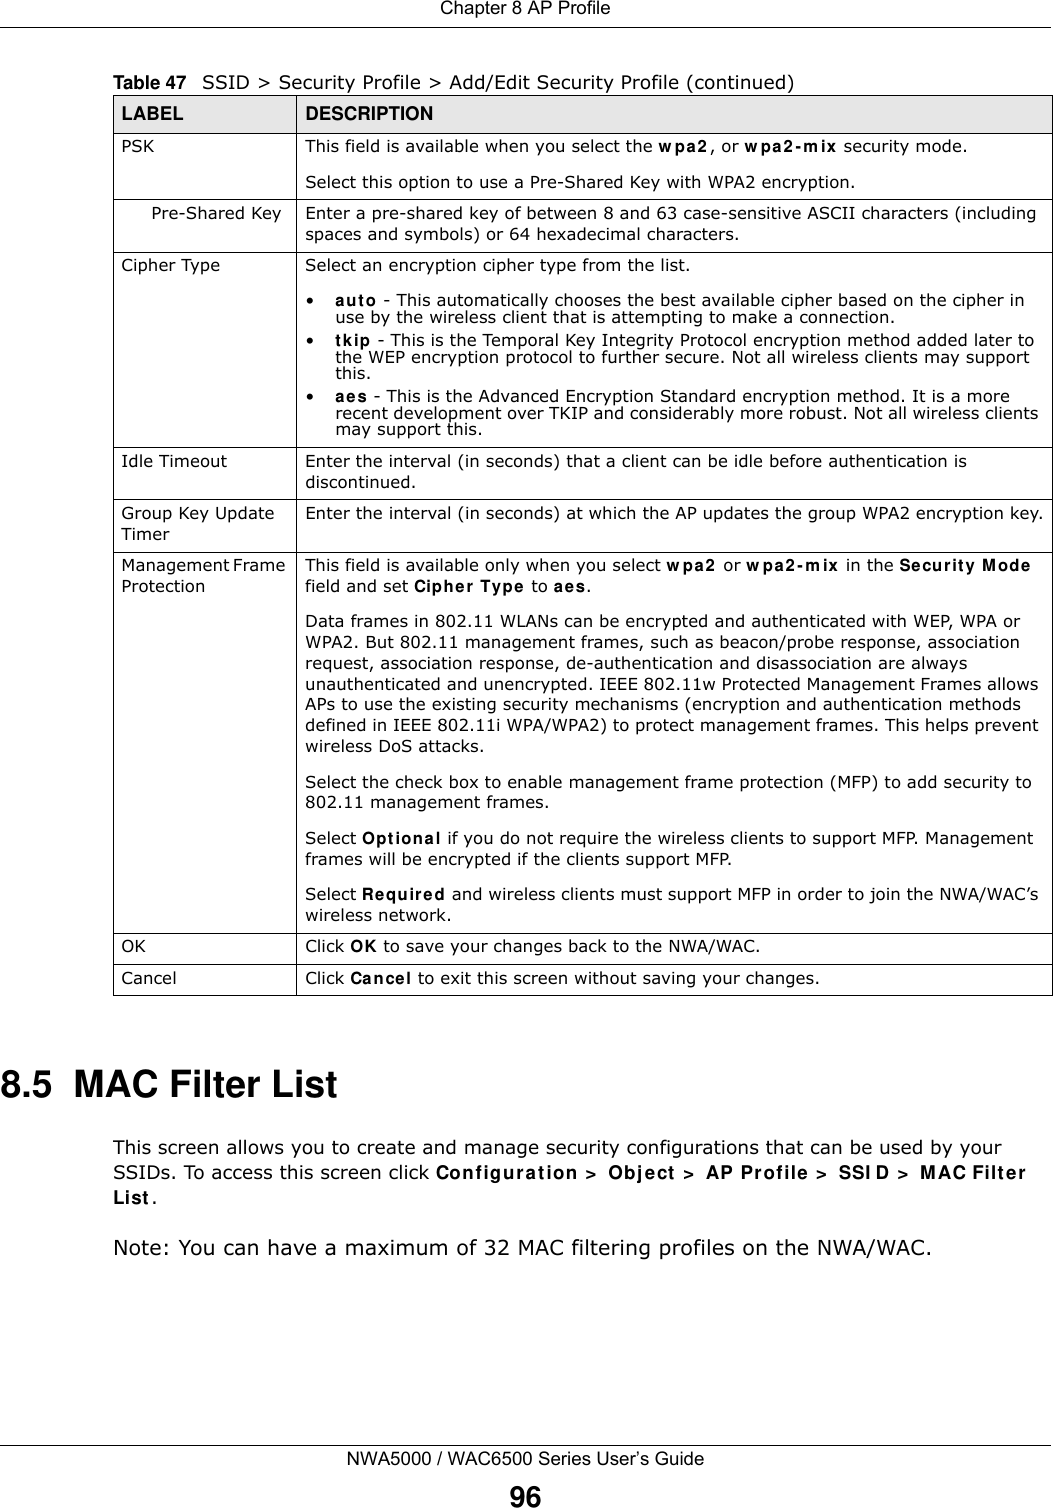 Chapter 8 AP ProfileNWA5000 / WAC6500 Series User’s Guide968.5  MAC Filter ListThis screen allows you to create and manage security configurations that can be used by your SSIDs. To access this screen click Configur at ion &gt;  Obje ct  &gt;  AP Profile &gt;  SSI D &gt;  M AC Filte r List .Note: You can have a maximum of 32 MAC filtering profiles on the NWA/WAC.PSK This field is available when you select the w pa2 , or w pa2 - m ix  security mode.Select this option to use a Pre-Shared Key with WPA2 encryption.Pre-Shared Key Enter a pre-shared key of between 8 and 63 case-sensitive ASCII characters (including spaces and symbols) or 64 hexadecimal characters.Cipher Type Select an encryption cipher type from the list. •a ut o - This automatically chooses the best available cipher based on the cipher in use by the wireless client that is attempting to make a connection.•t k ip  - This is the Temporal Key Integrity Protocol encryption method added later to the WEP encryption protocol to further secure. Not all wireless clients may support this.•aes - This is the Advanced Encryption Standard encryption method. It is a more recent development over TKIP and considerably more robust. Not all wireless clients may support this.Idle Timeout Enter the interval (in seconds) that a client can be idle before authentication is discontinued. Group Key Update TimerEnter the interval (in seconds) at which the AP updates the group WPA2 encryption key.Management Frame ProtectionThis field is available only when you select w pa2  or w pa2 - m ix in the Securit y Mode  field and set Cipher  Type to aes.Data frames in 802.11 WLANs can be encrypted and authenticated with WEP, WPA or WPA2. But 802.11 management frames, such as beacon/probe response, association request, association response, de-authentication and disassociation are always unauthenticated and unencrypted. IEEE 802.11w Protected Management Frames allows APs to use the existing security mechanisms (encryption and authentication methods defined in IEEE 802.11i WPA/WPA2) to protect management frames. This helps prevent wireless DoS attacks.Select the check box to enable management frame protection (MFP) to add security to 802.11 management frames.Select Opt io nal if you do not require the wireless clients to support MFP. Management frames will be encrypted if the clients support MFP.Select Re quir e d and wireless clients must support MFP in order to join the NWA/WAC’s wireless network.OK Click OK to save your changes back to the NWA/WAC.Cancel Click Cancel to exit this screen without saving your changes.Table 47   SSID &gt; Security Profile &gt; Add/Edit Security Profile (continued)LABEL DESCRIPTION